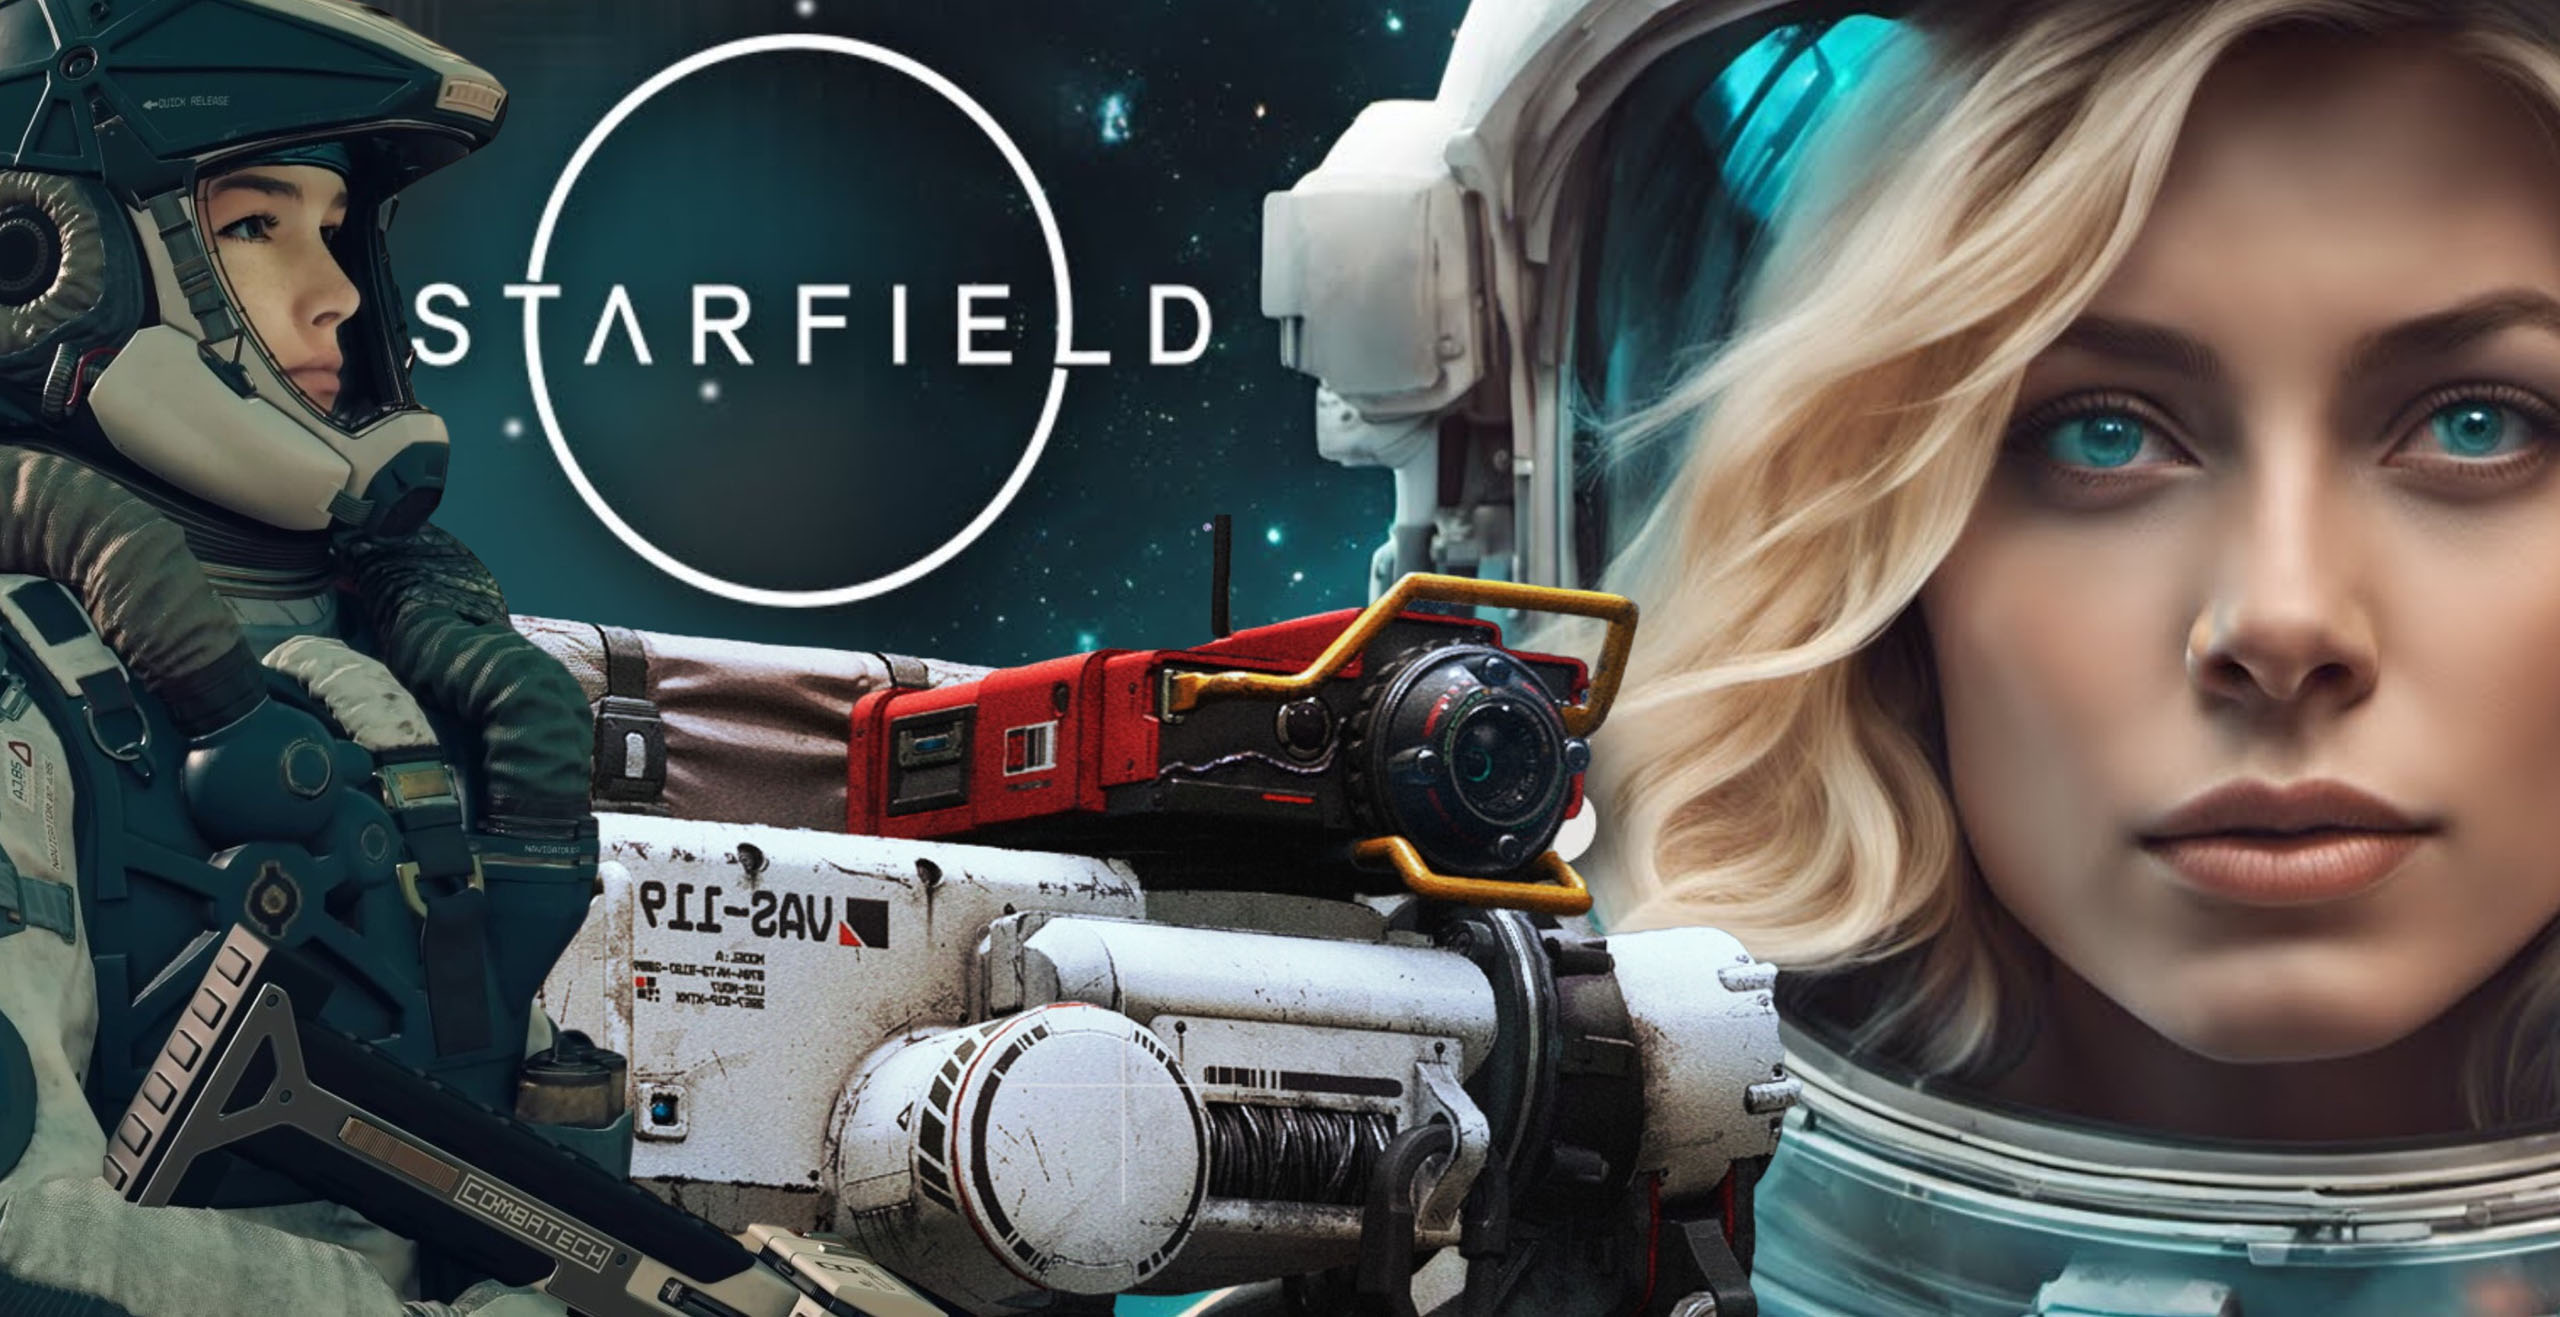 Starfield review: The best game Bethesda ever created?